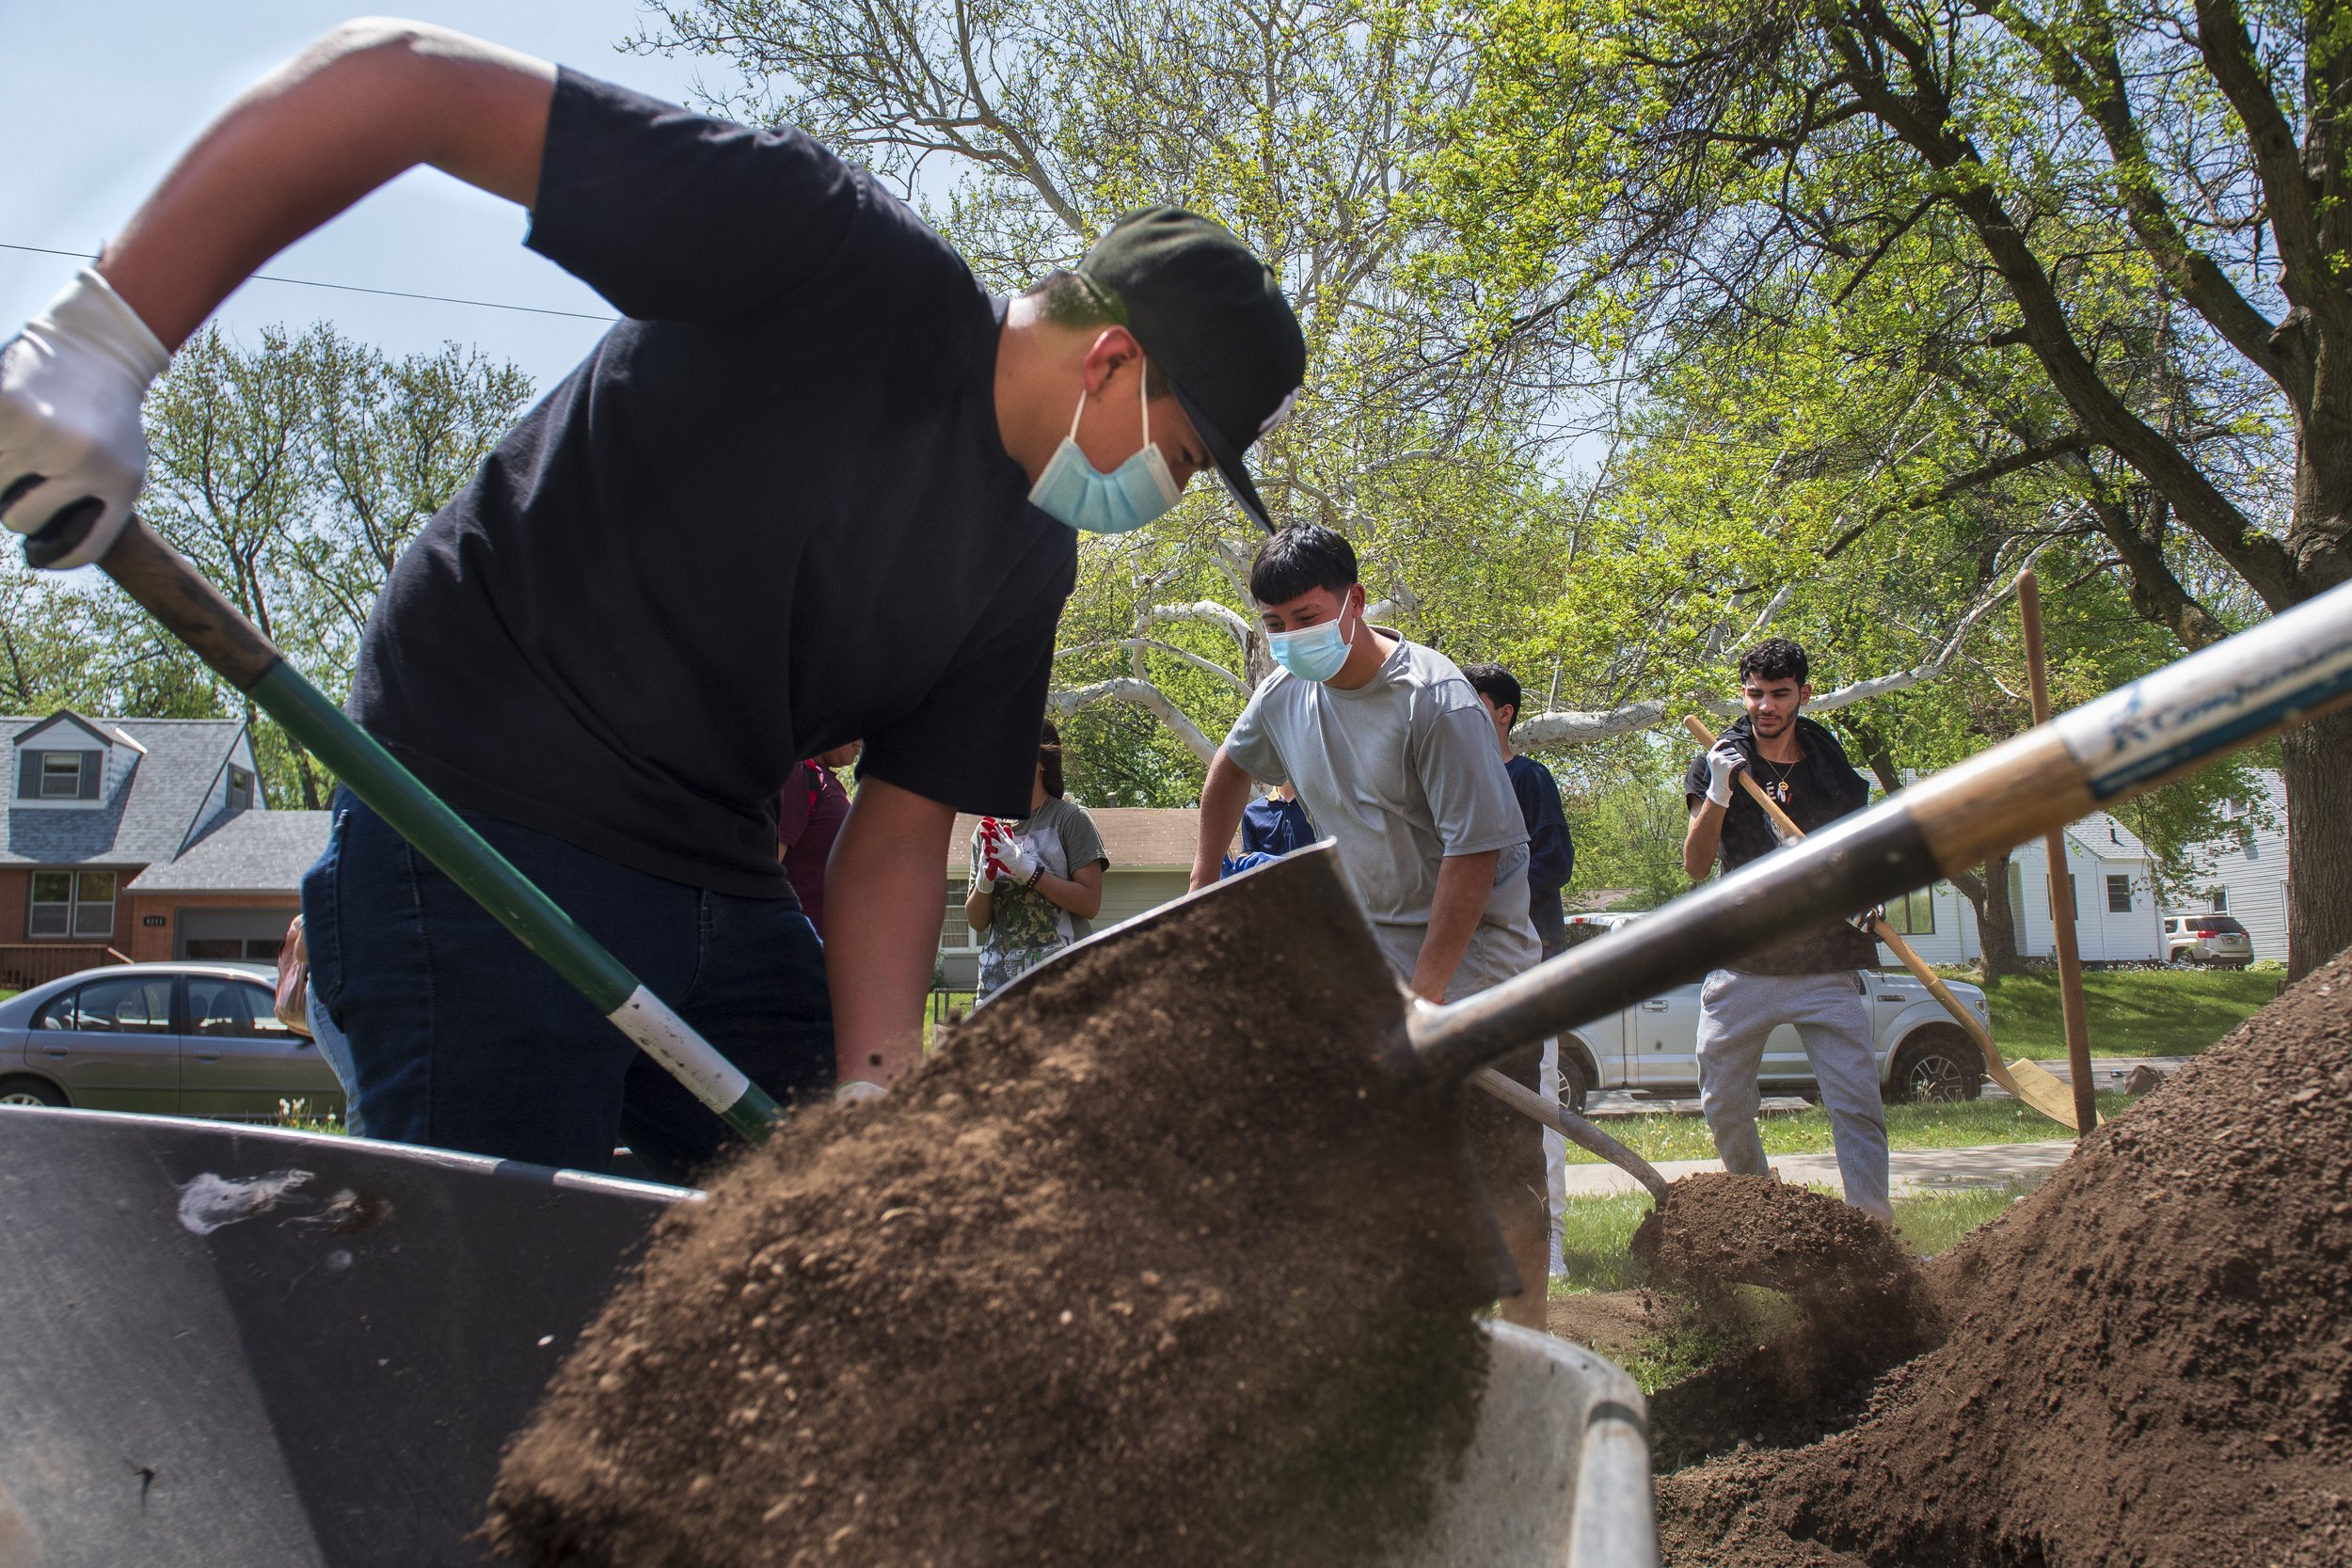  Lincoln Northeast ELL students fill wheelbarrows with dirt to fill garden beds as they build a seedfolks community garden outside of Lincoln Northeast High School on May 11, 2022, in Lincoln, Nebraska. ELL students conceived and organized the garden